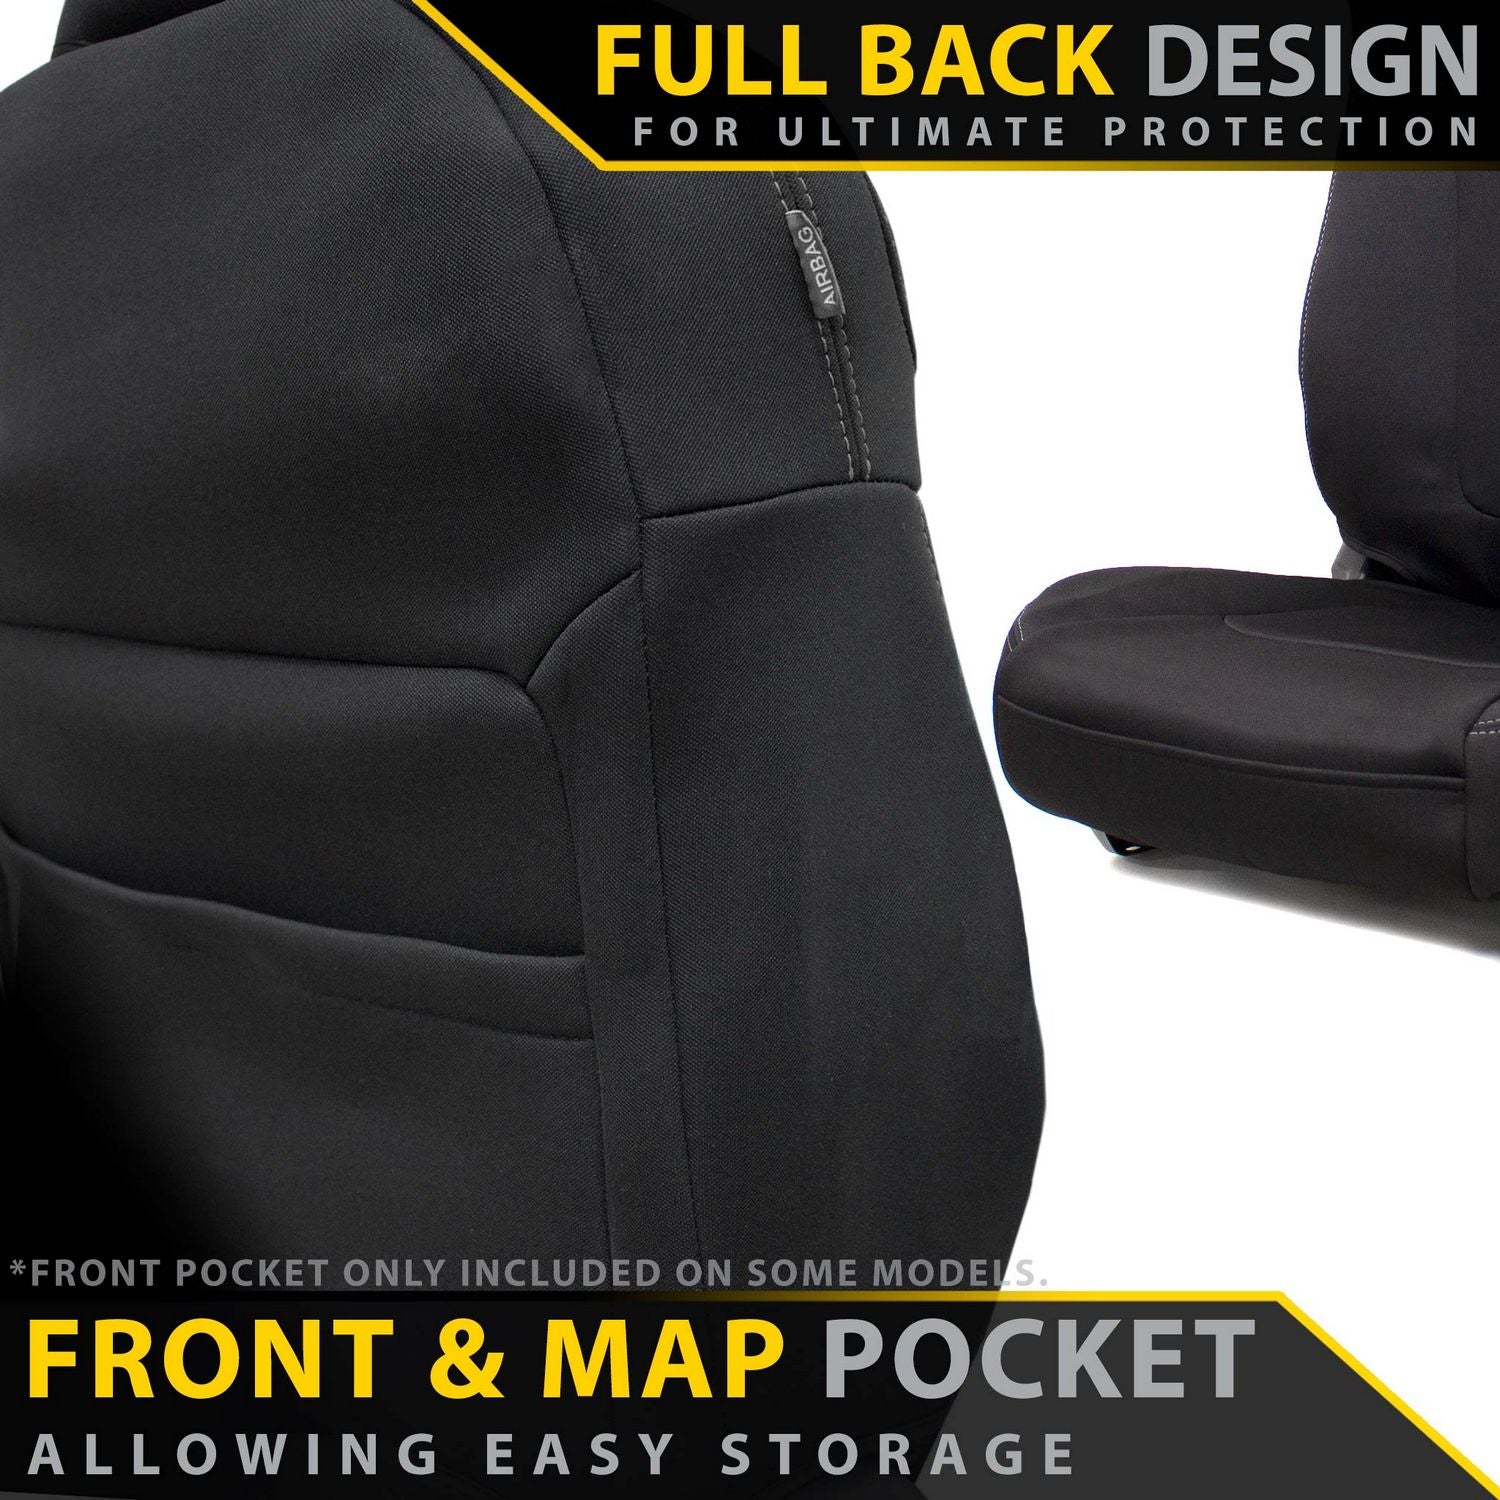 Toyota FJ Cruiser Neoprene 2x Front Row Seat Covers (Made to Order)